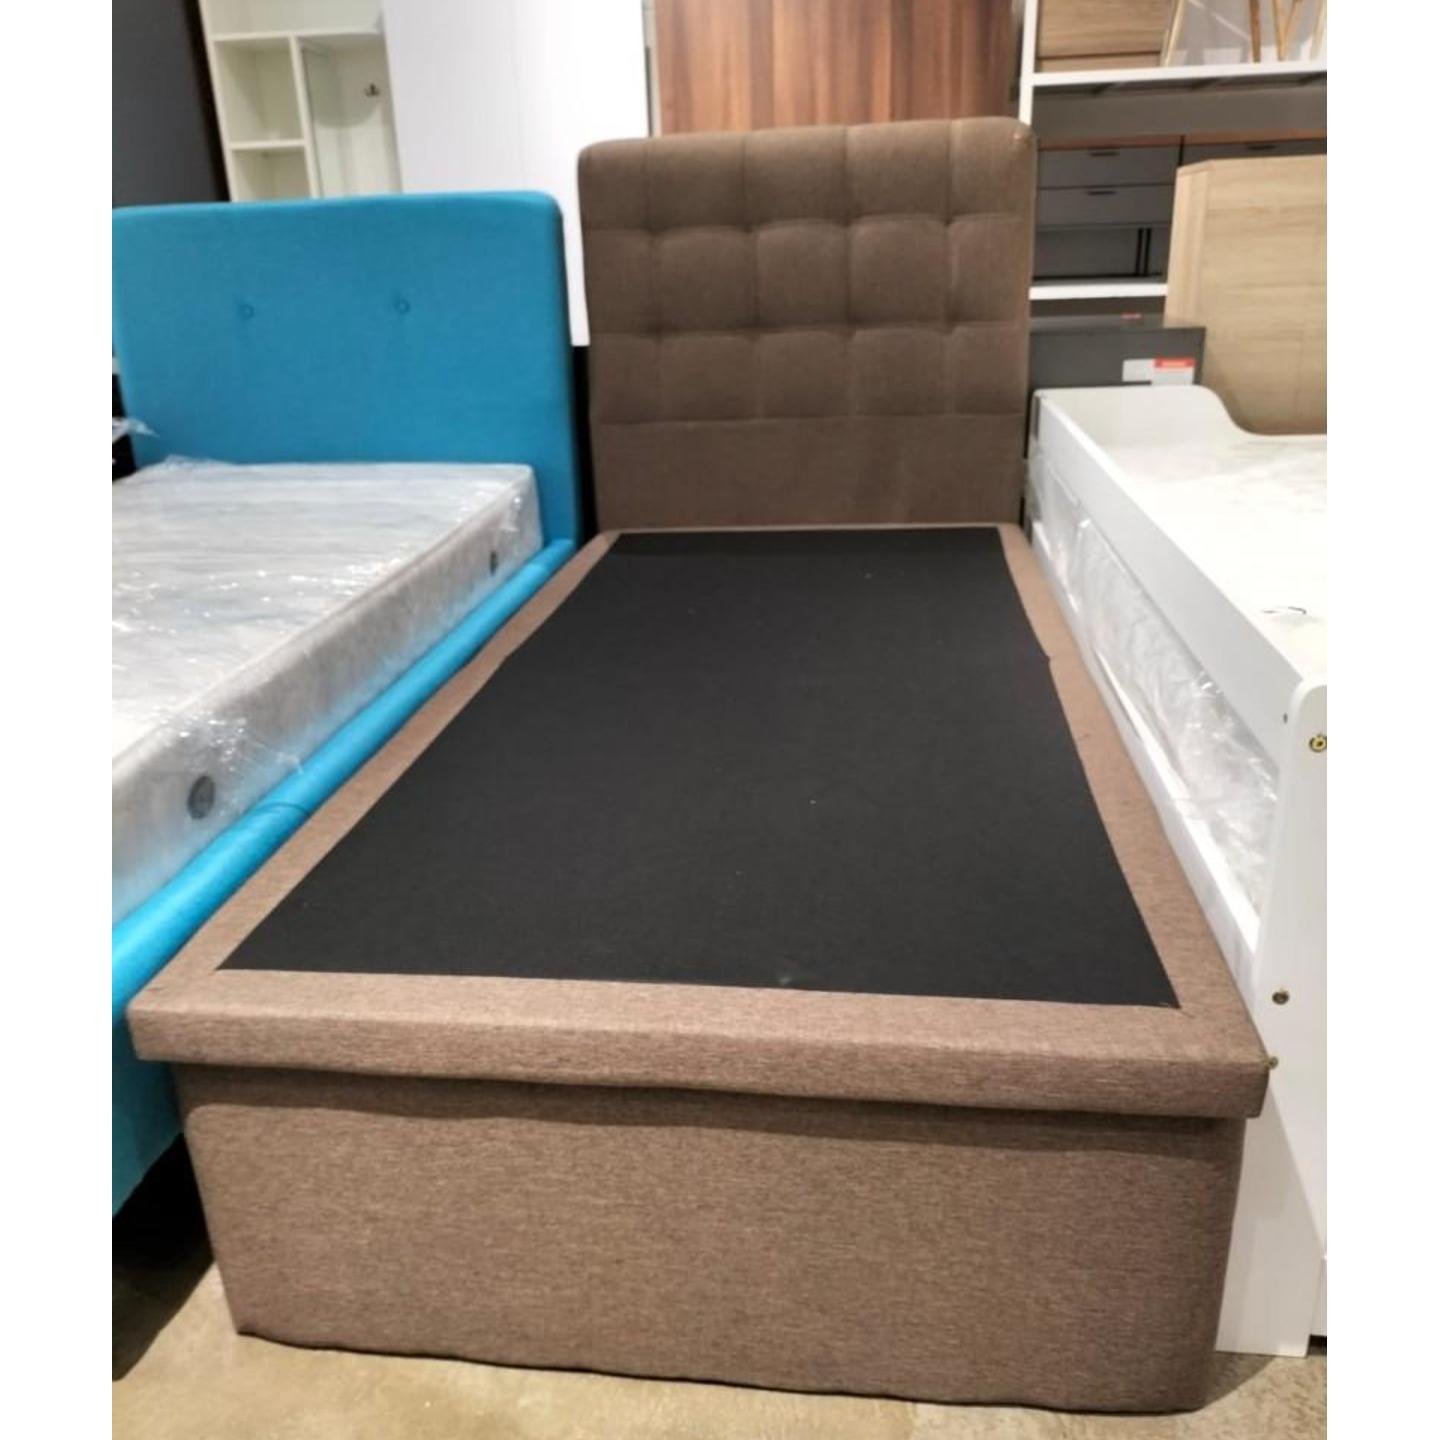 PARADIZE Single Storage Bed in BROWN FABRIC